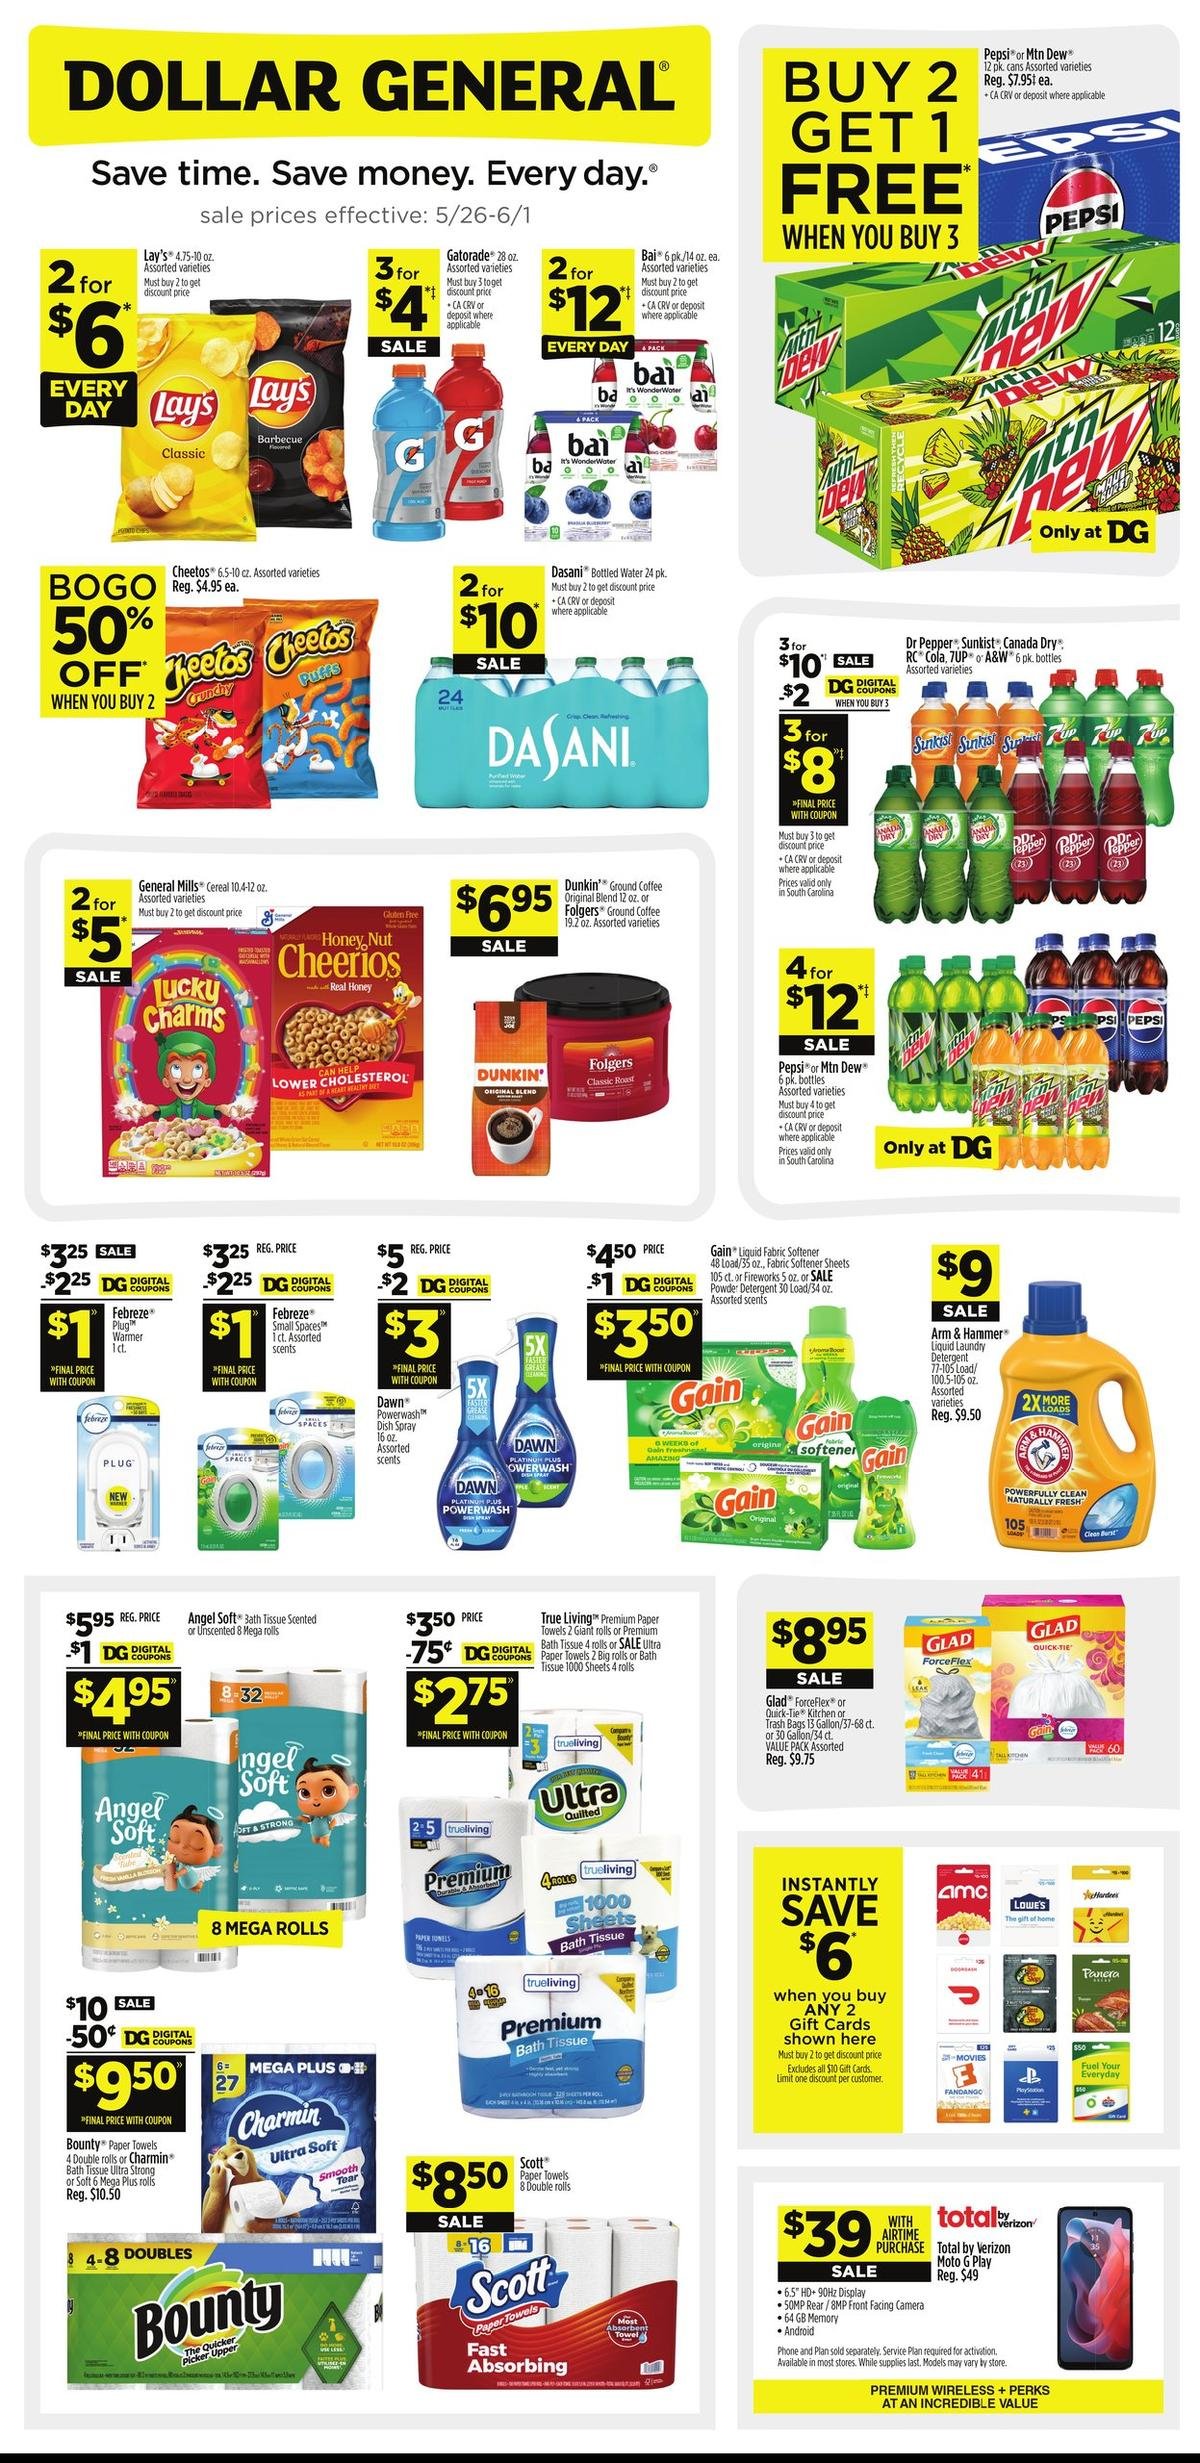 Dollar General weekly ad - page 1